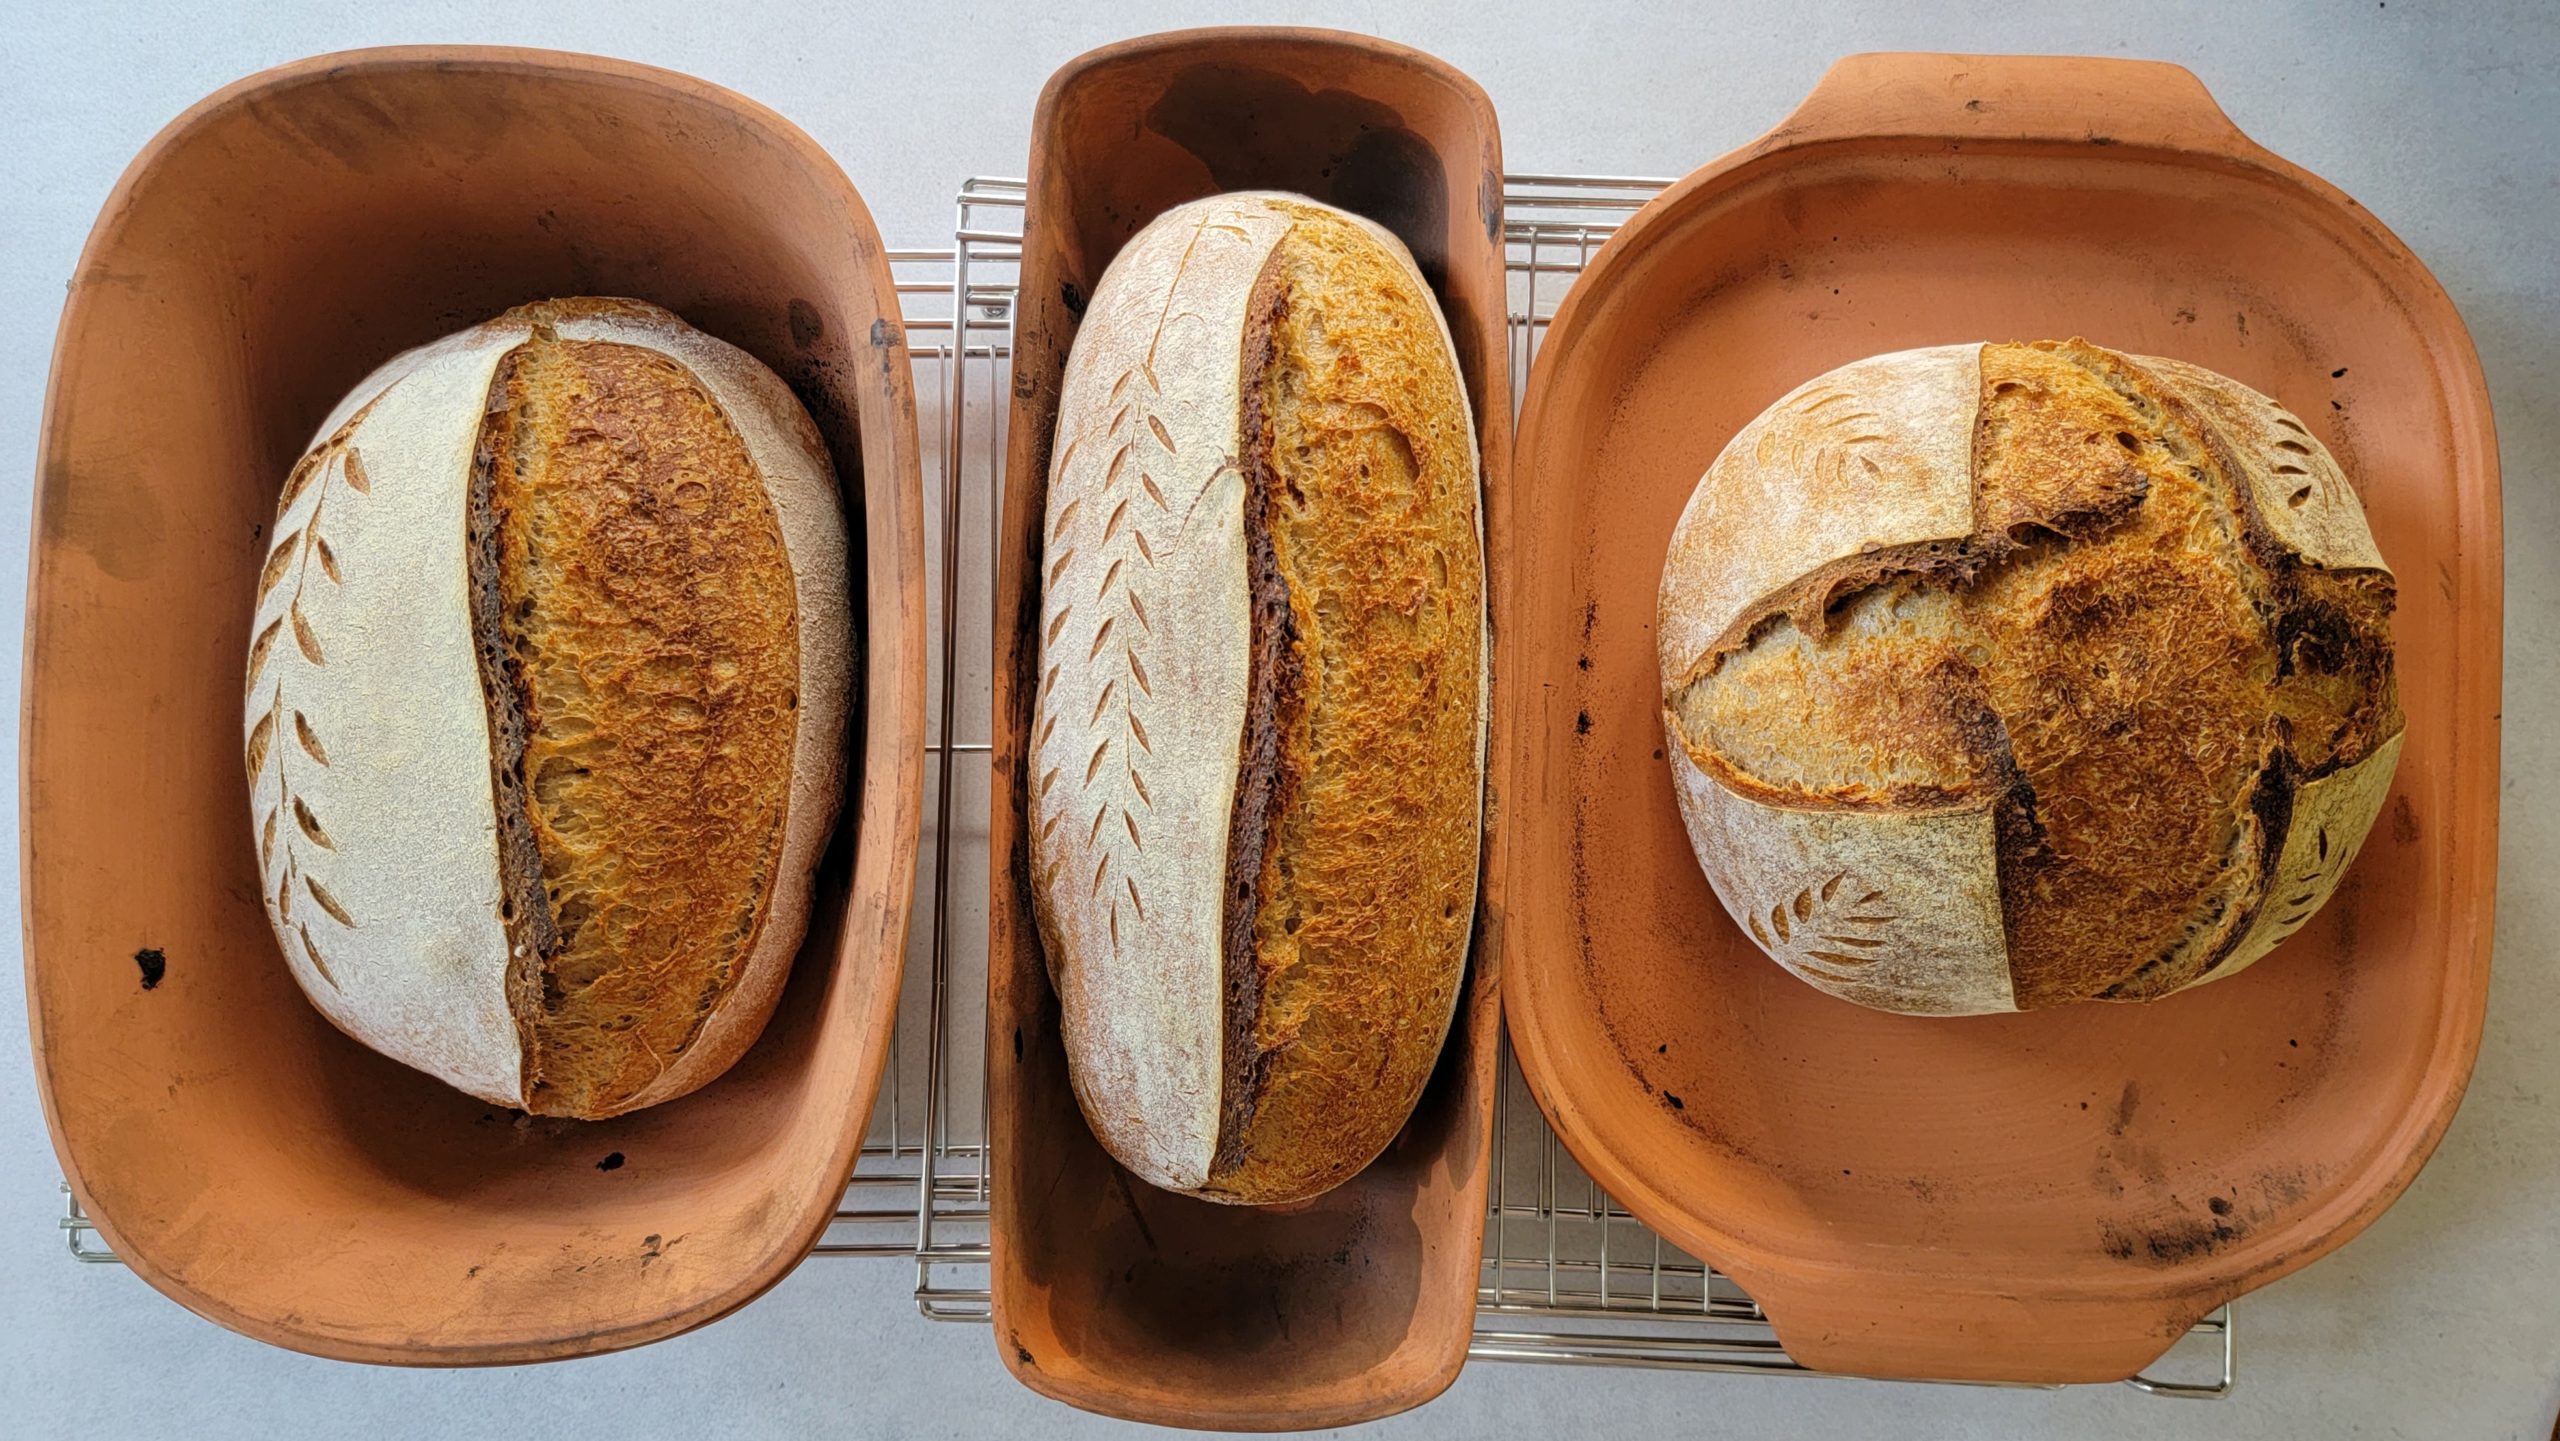 https://breadtopia.com/wp-content/uploads/2022/09/bread-in-3-vessels-scaled.jpeg